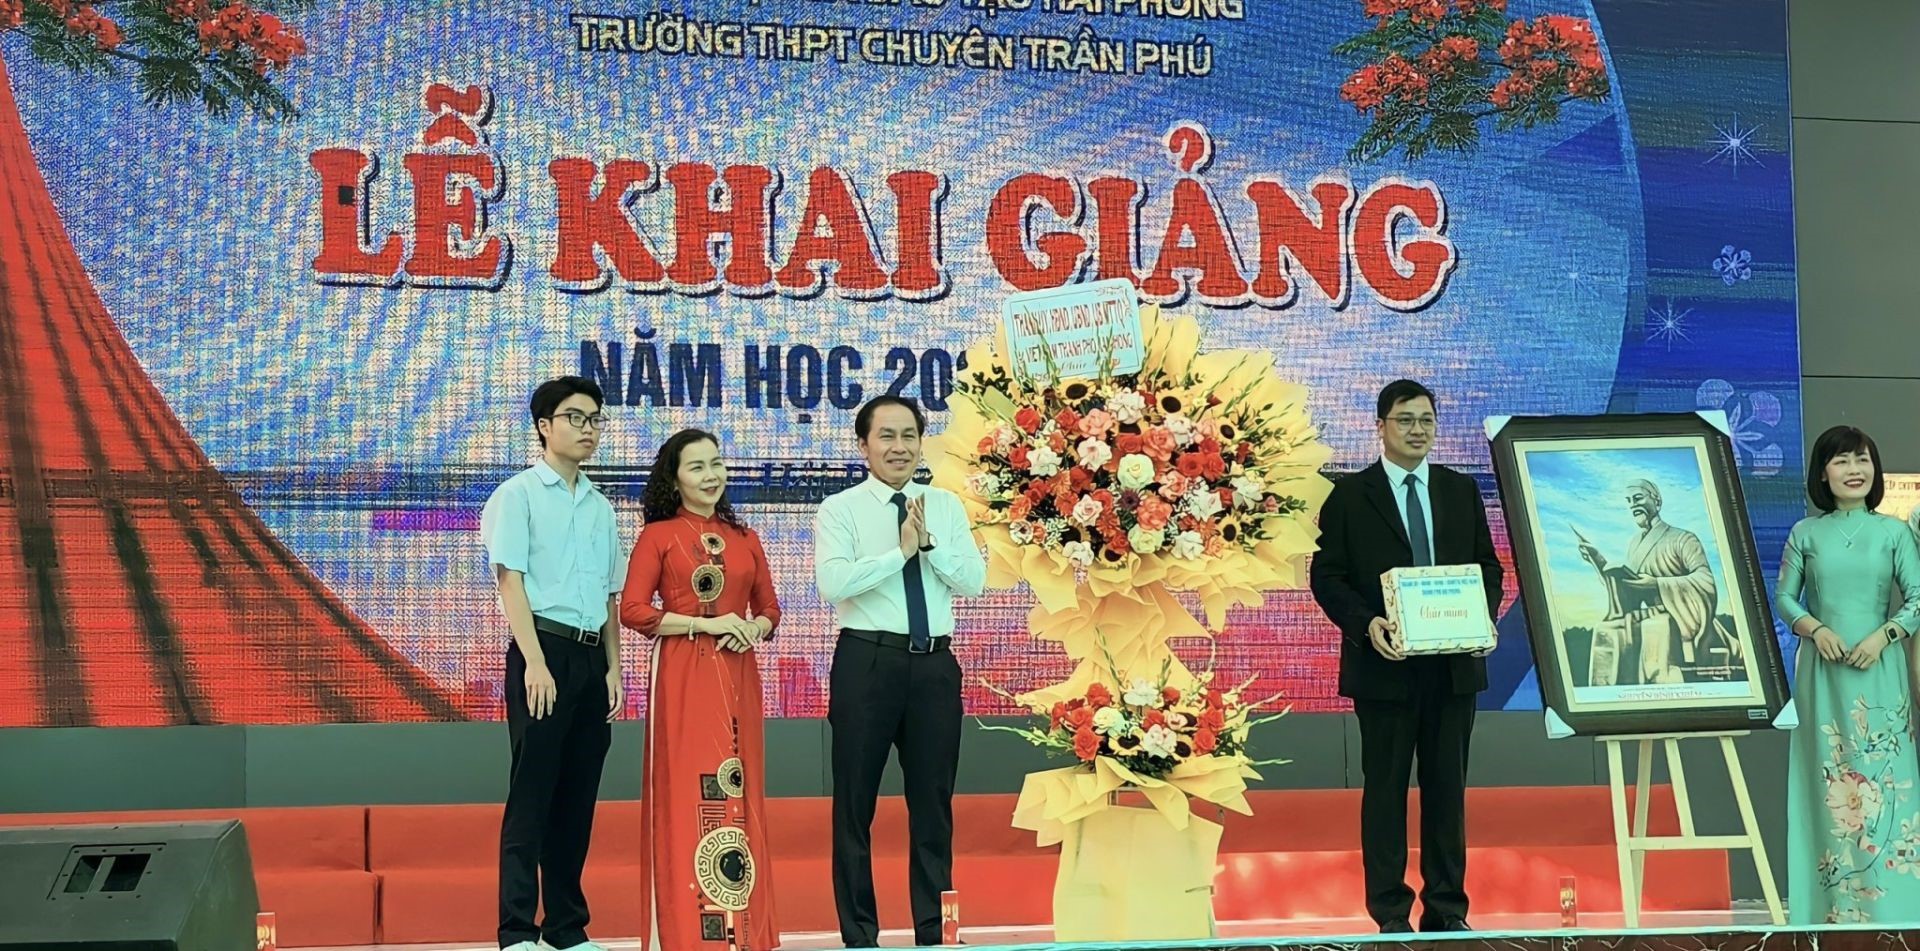 The Secretary of the HP City Party Committee gave flowers and gifts from the city to encourage teachers and students of Tran Phu High School to forever promote the fine tradition of being proud to be the leader in education in the city.